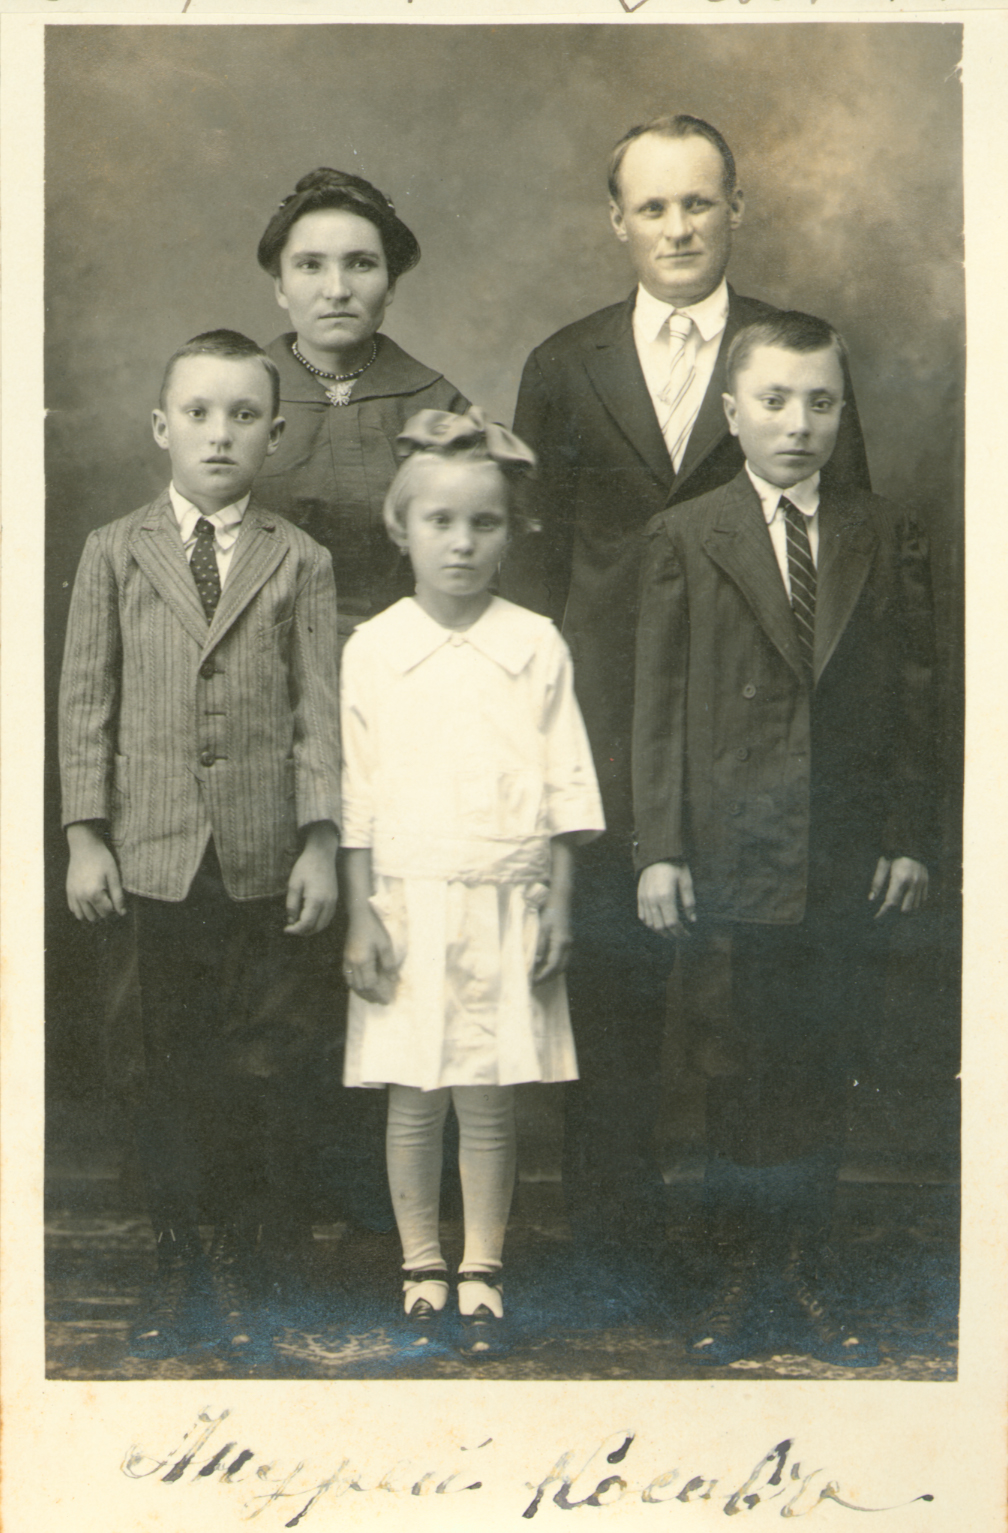 Portrait of a Siberian family that immigrated to Hawaii to work on plantations before relocating to San Francisco.